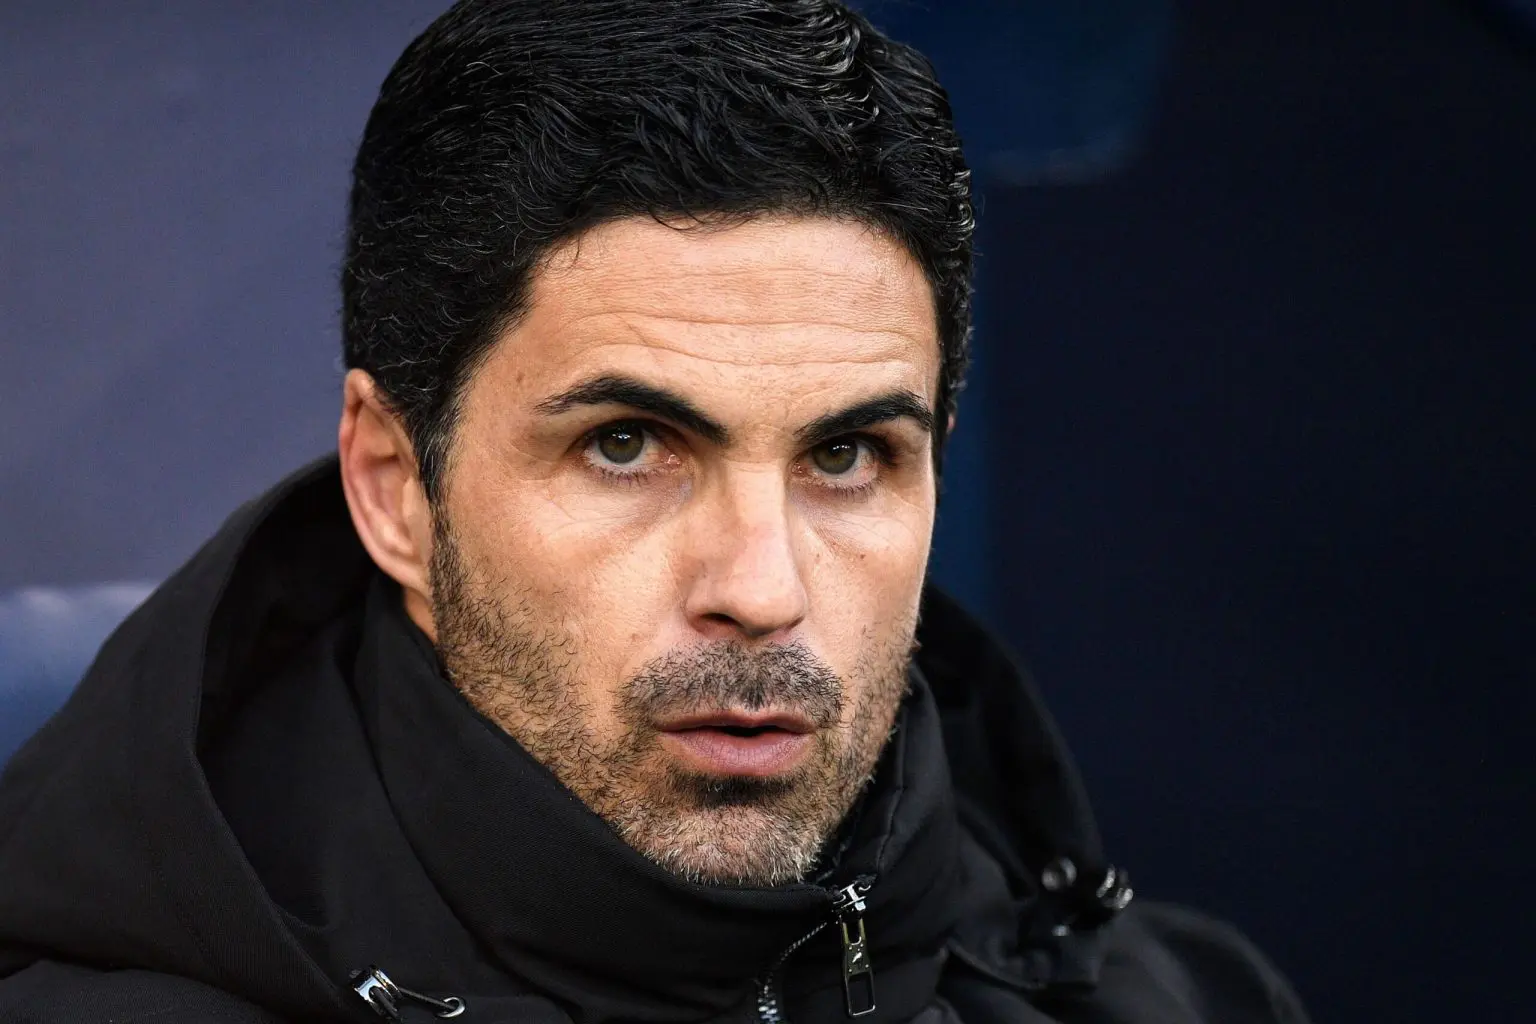 EPL: Arteta told he’s playing Arsenal midfielder in wrong position